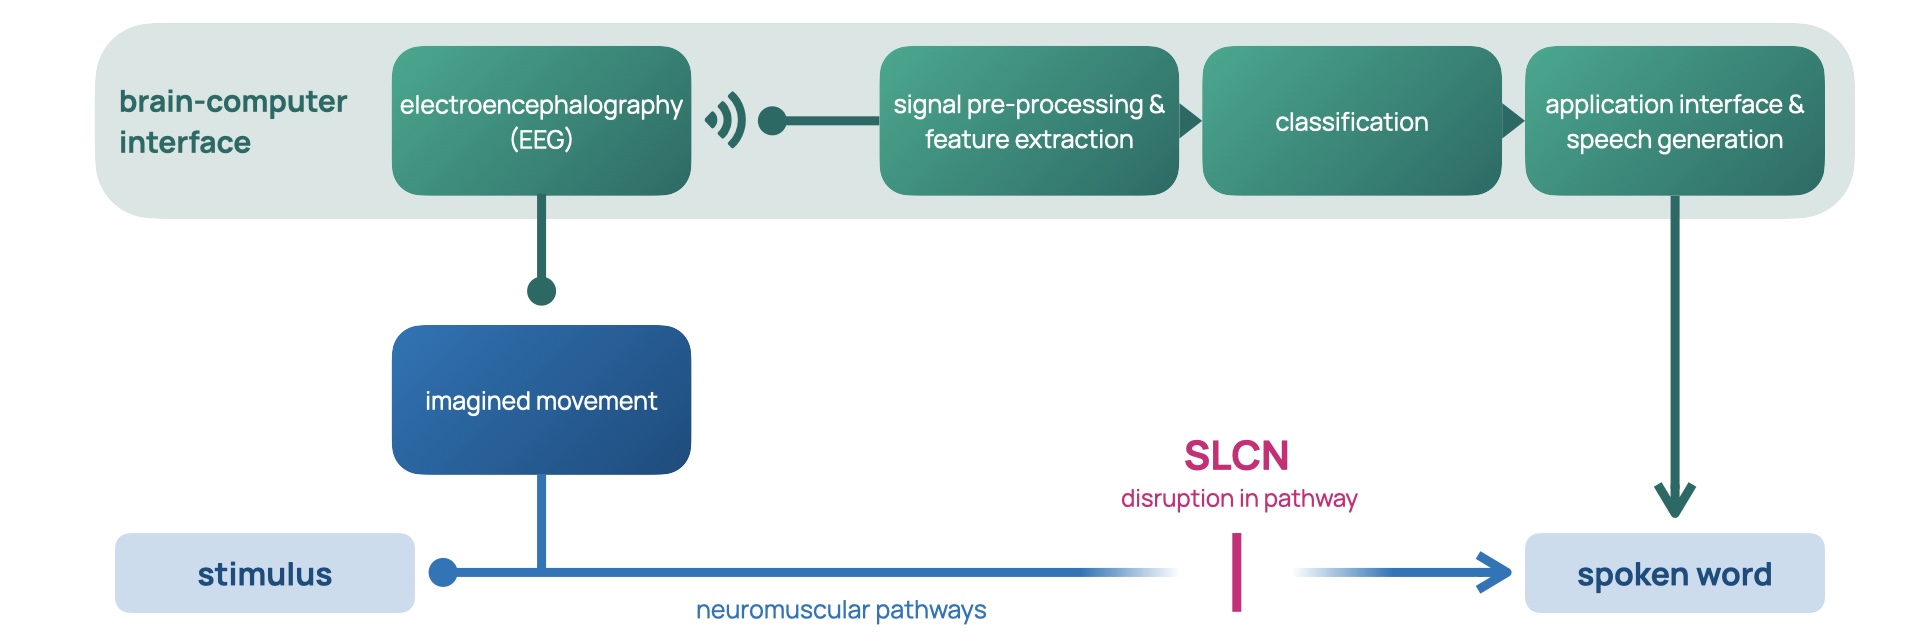 Slide 1: 'Brain-computer interface offer a universal, non-muscular channel for communication'